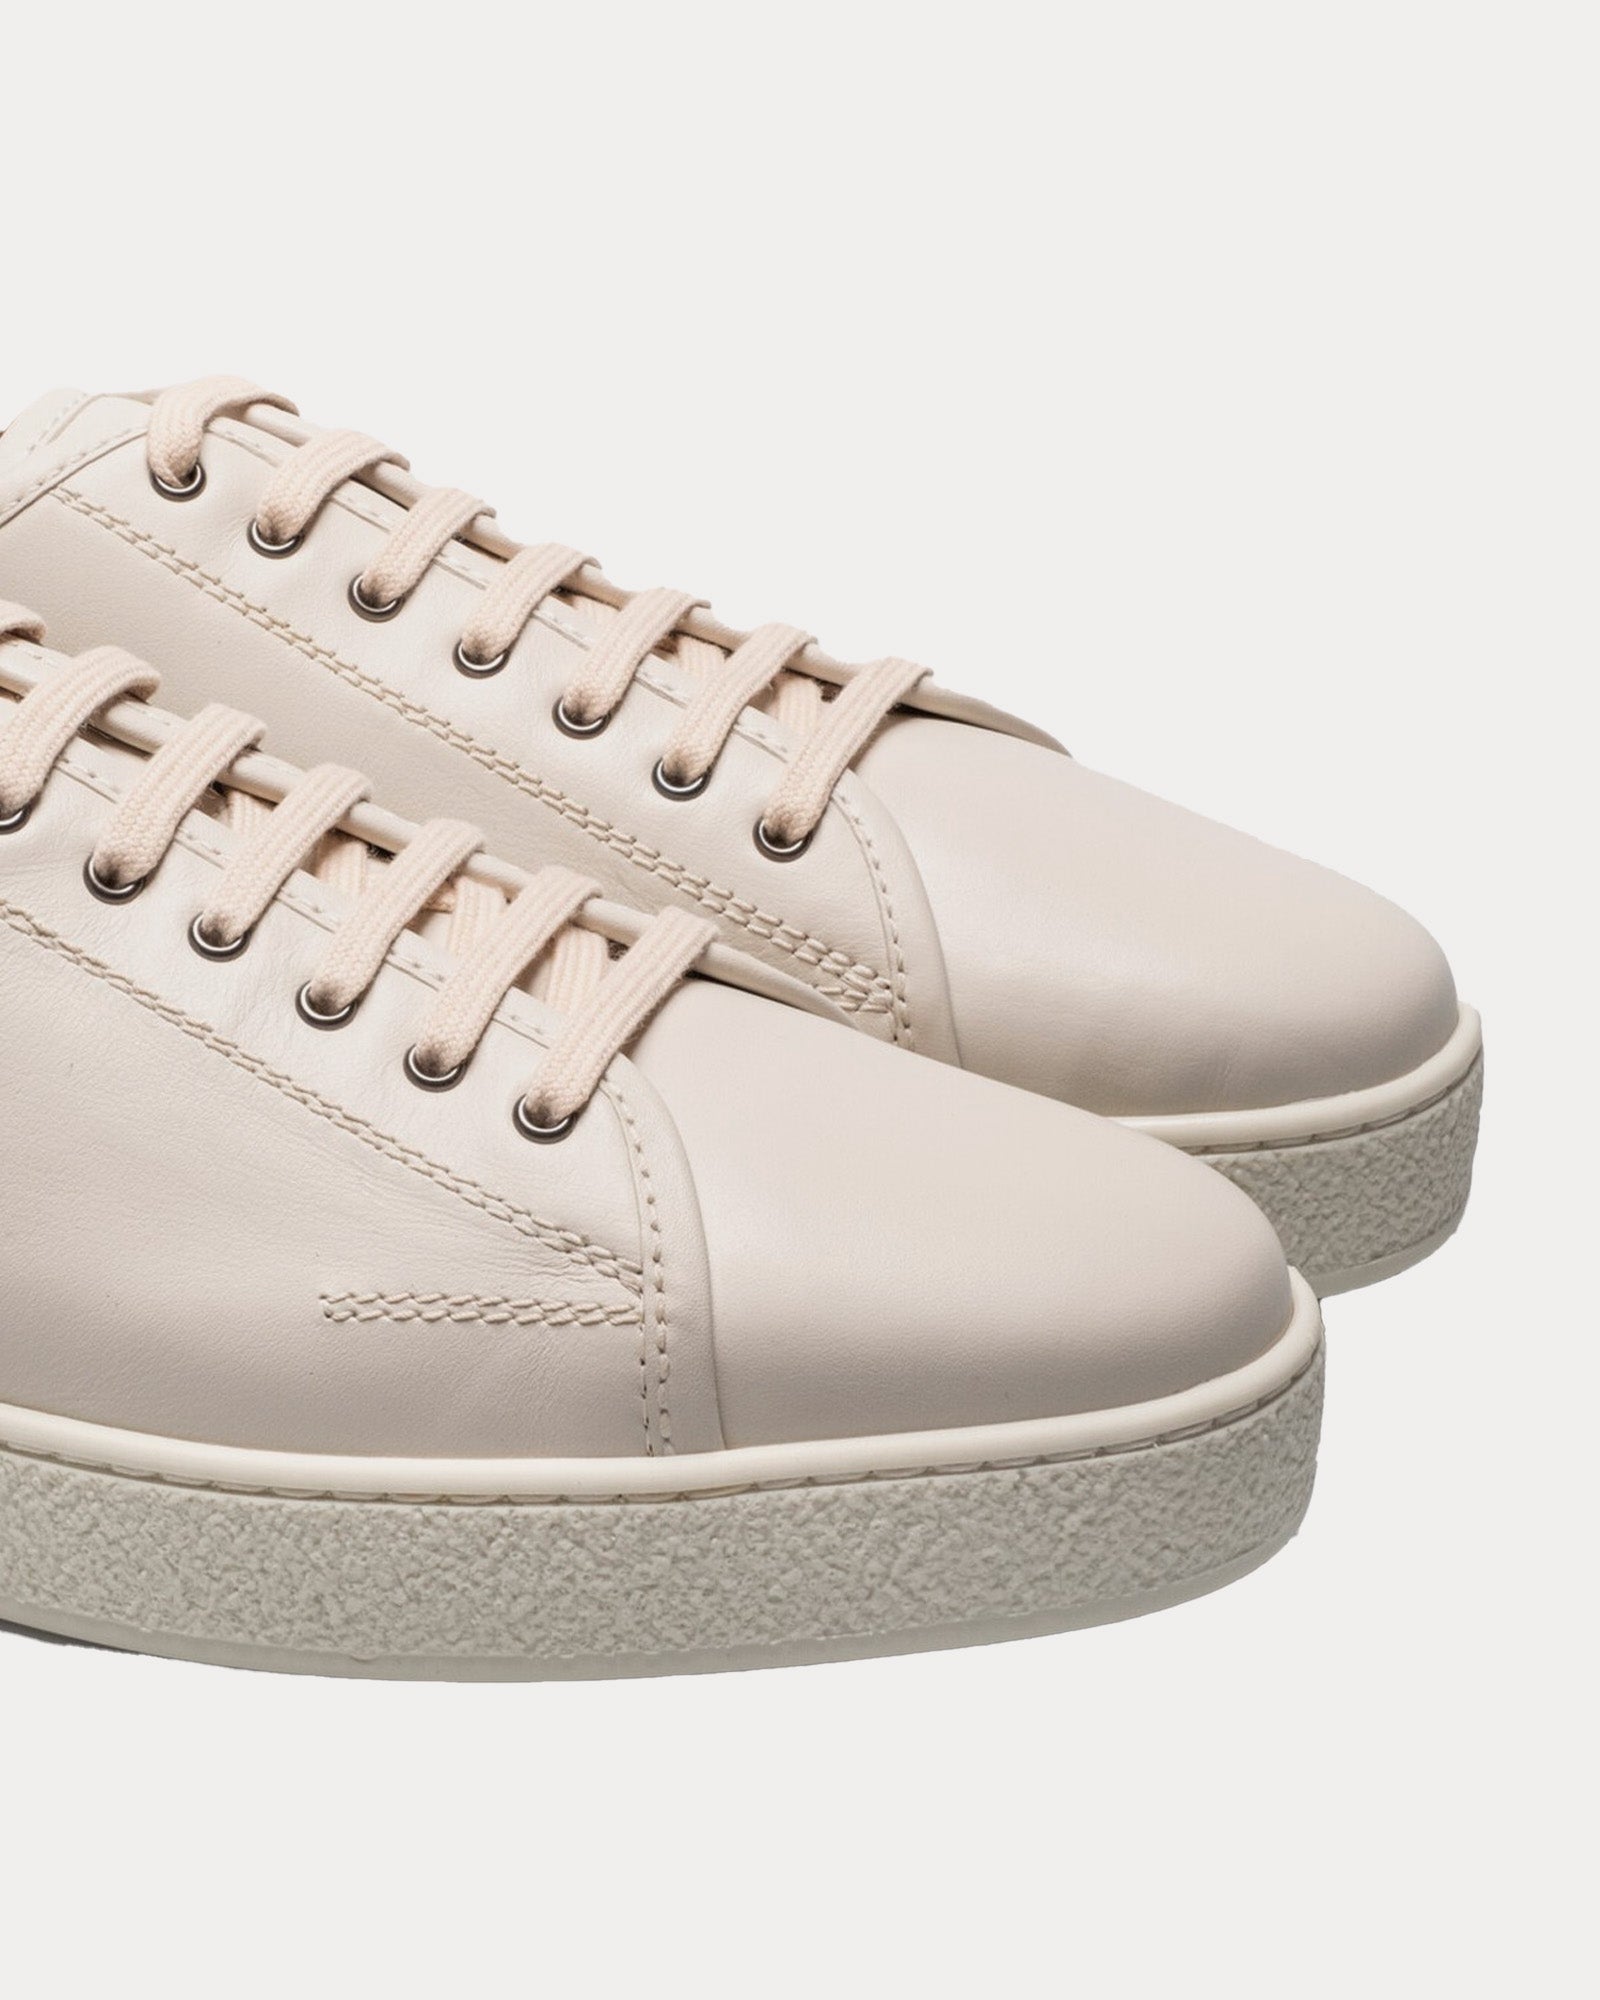 John Lobb - Stockwell Calf Leather White Low Top Sneakers